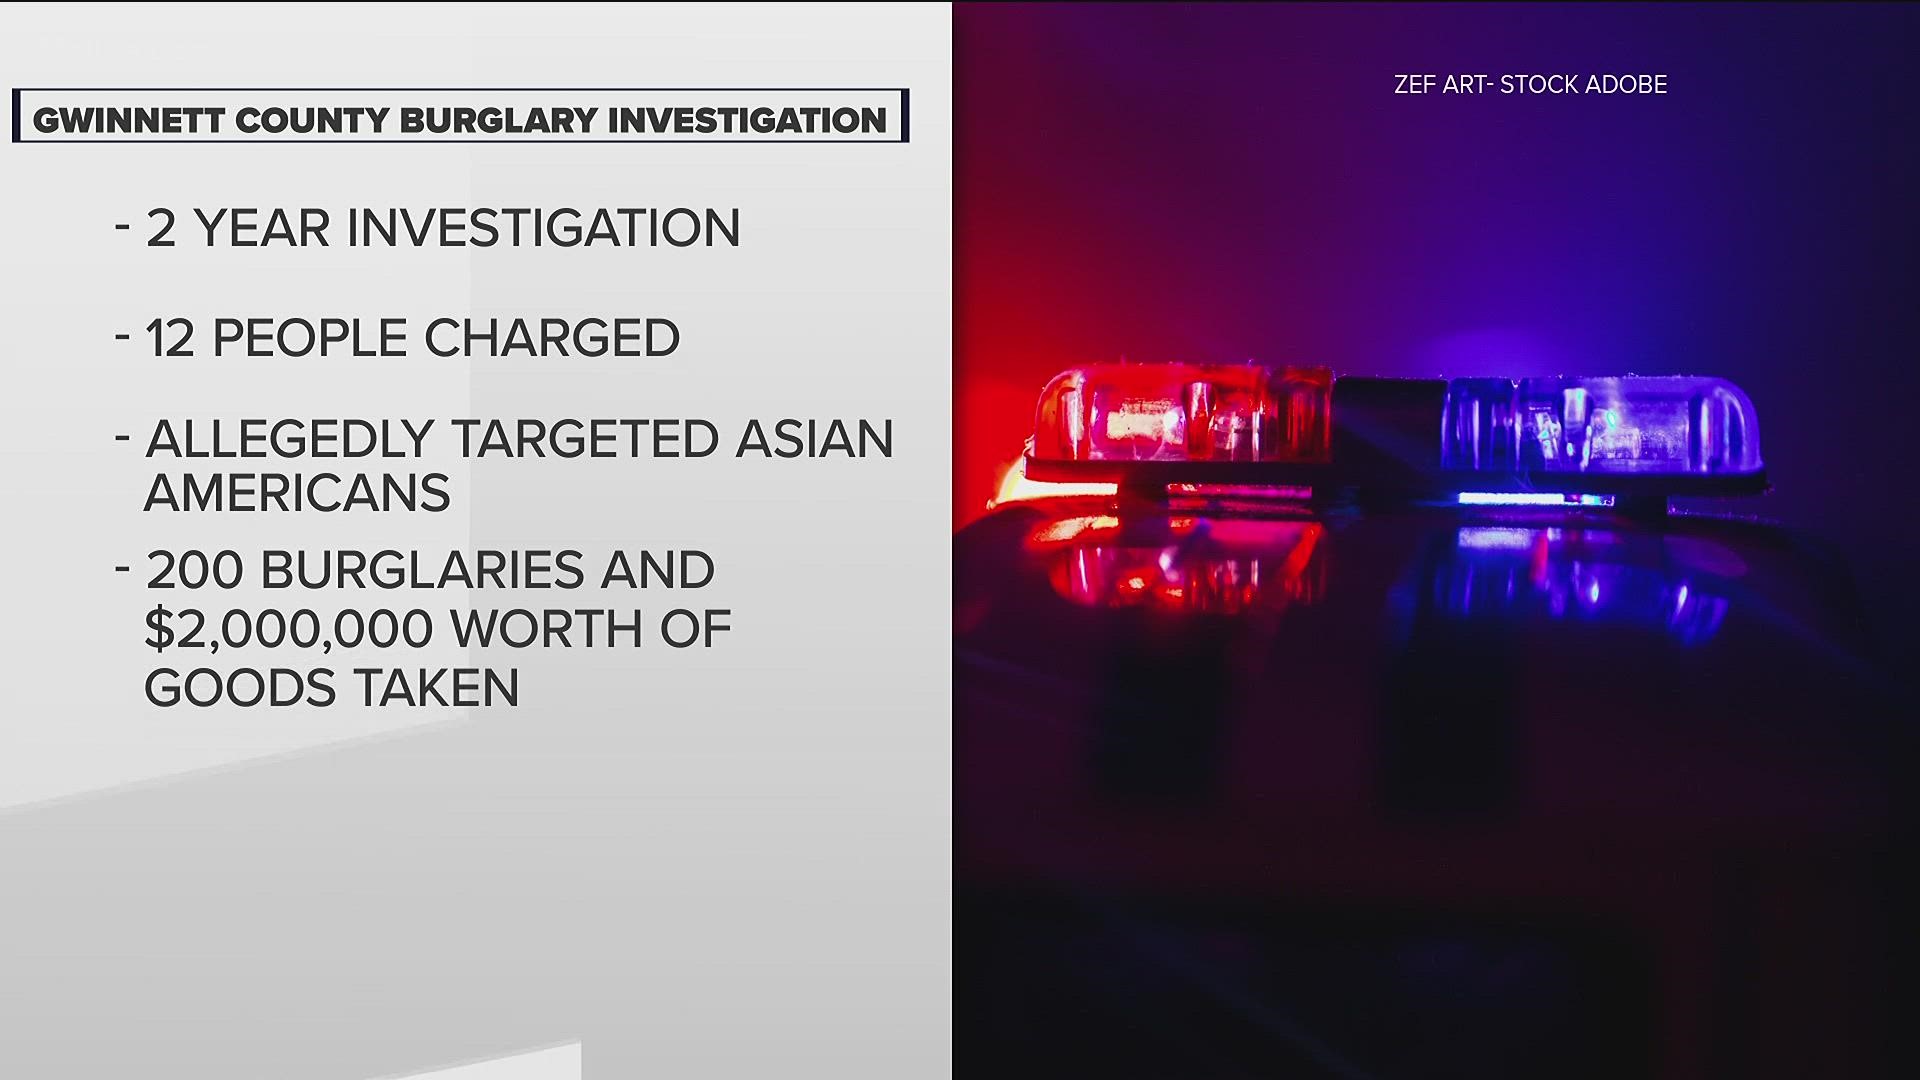 According to the police department, Gwinnett County had a string of burglaries targeting victims of Asian descent since 2019.